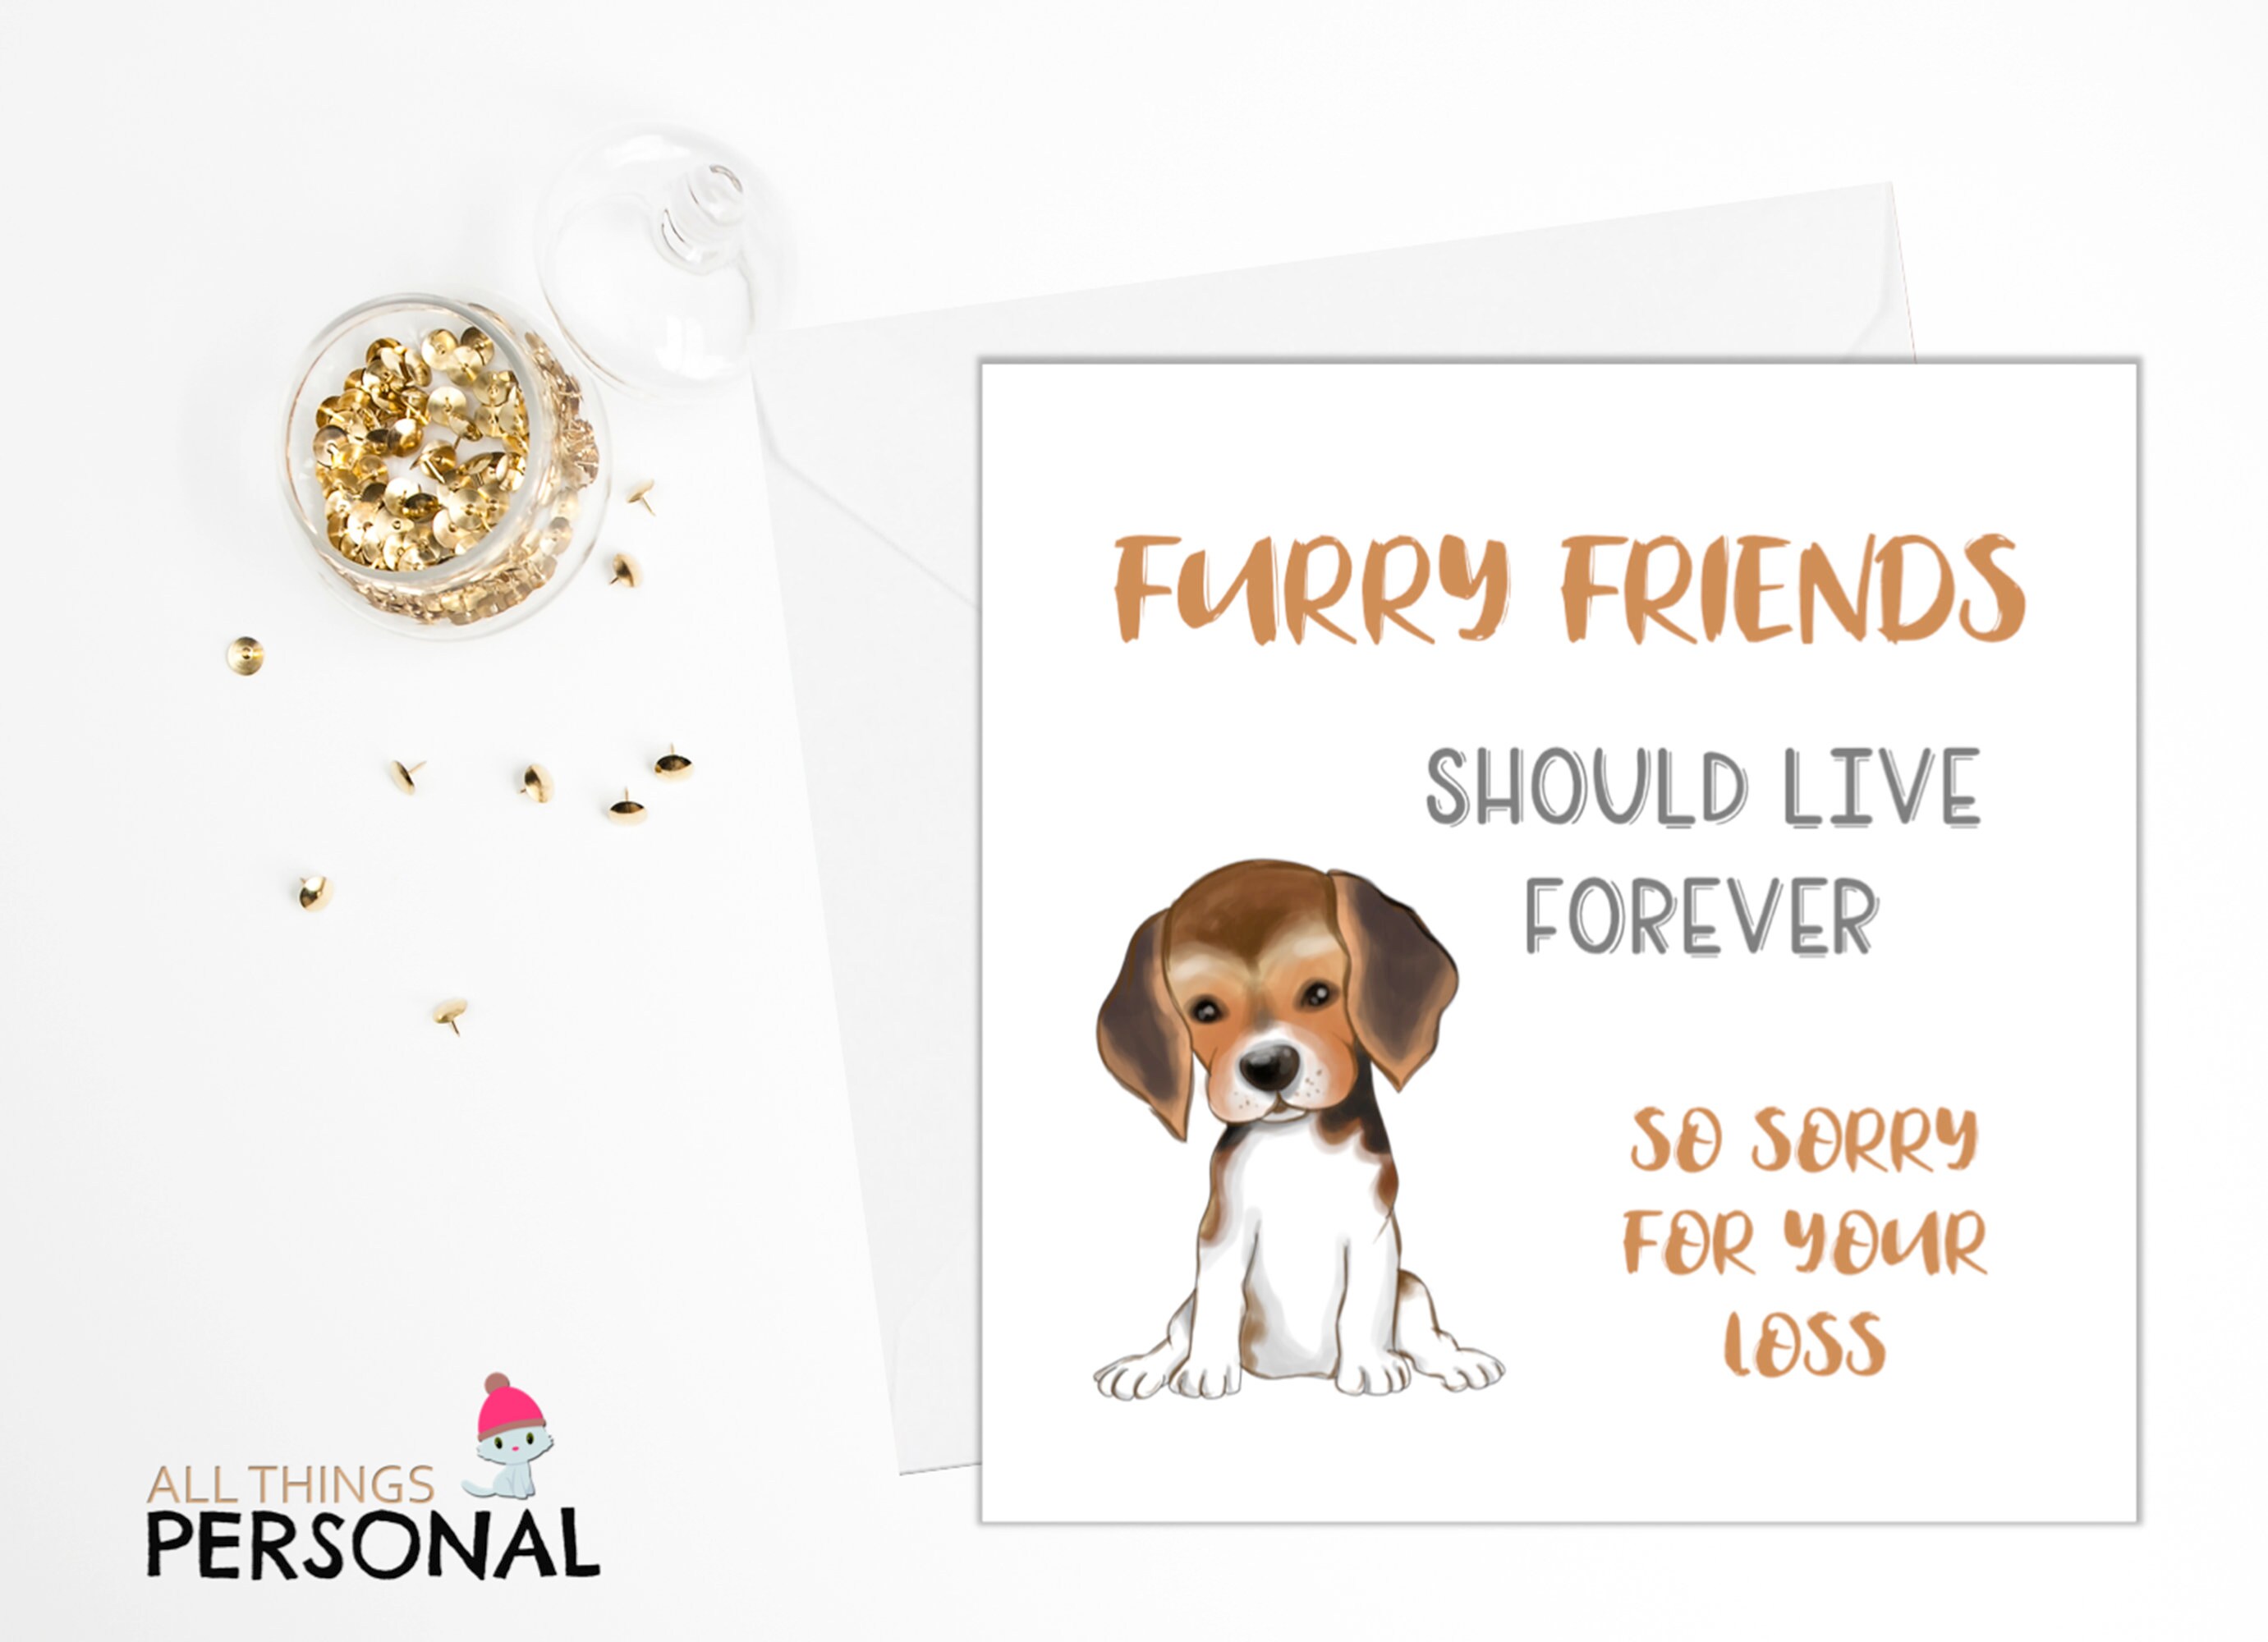 Love's Travel Stops - How many #MyLoveRewards members take their furry  friends with them on the road? Snap a pic of them with your My Love Rewards  card and get 500 points